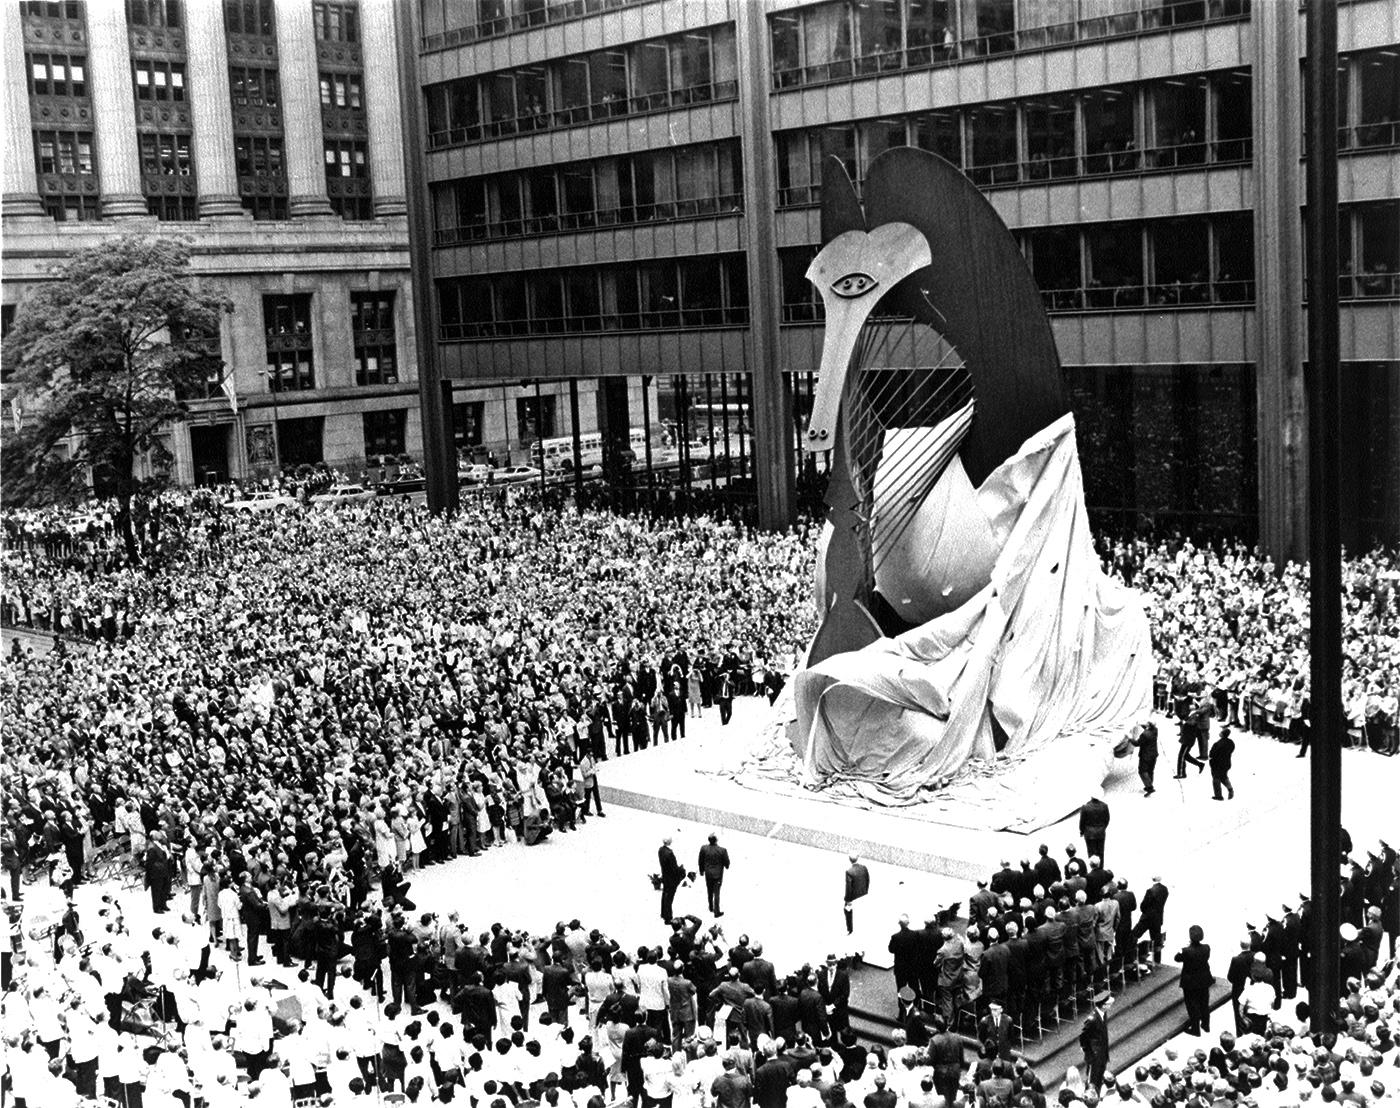 The unveiling of the Chicago Picasso, with a large crowd around the sculpture